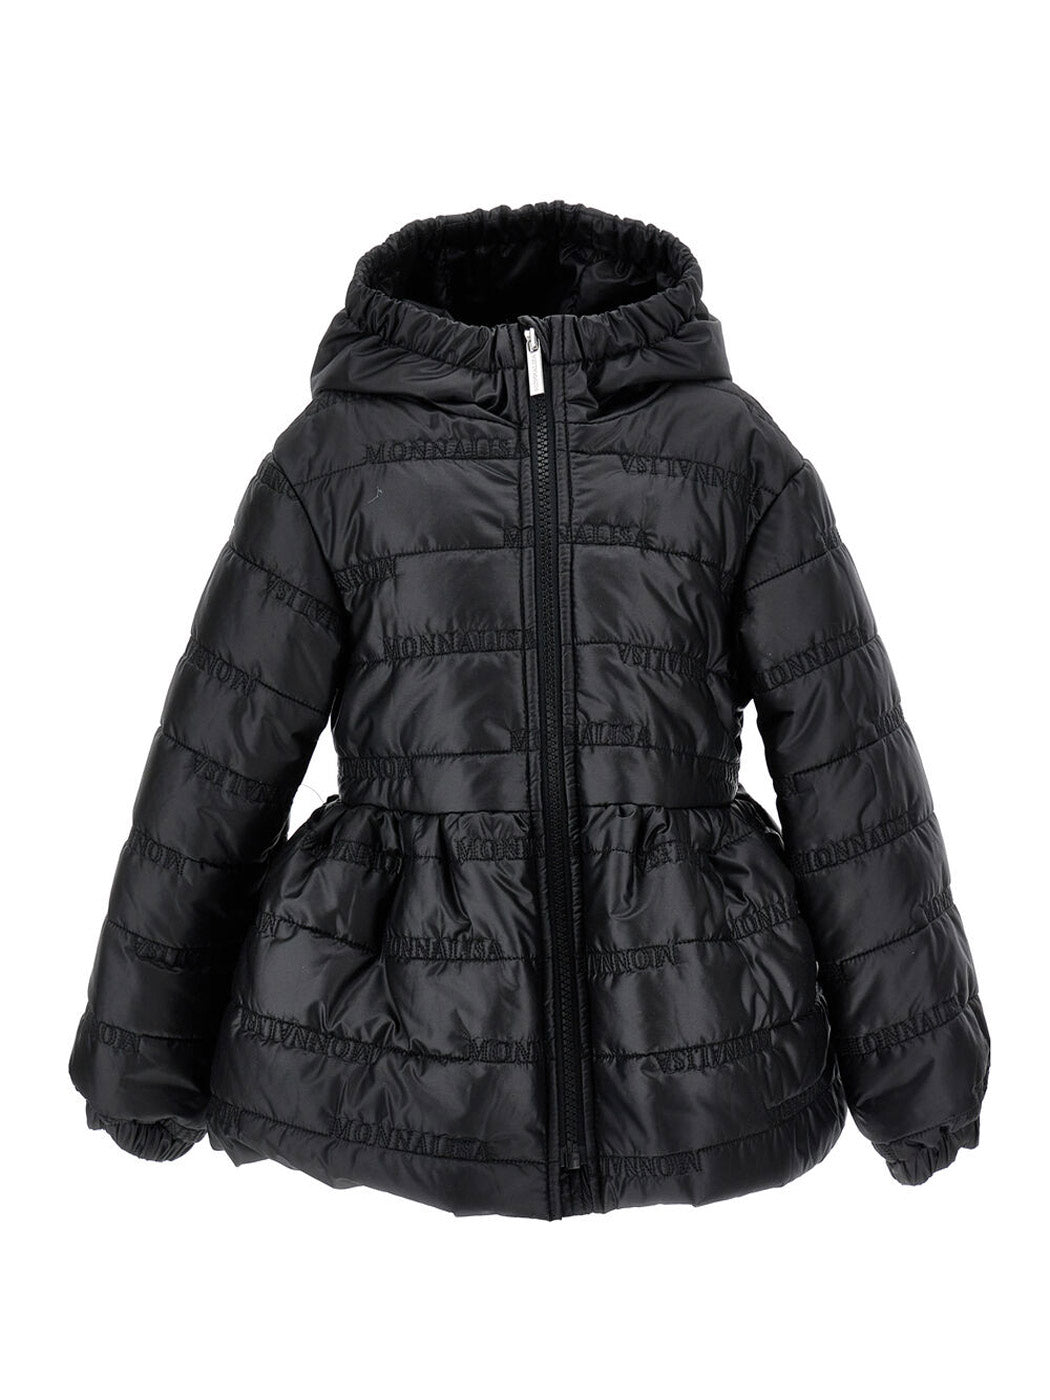 MONNALISA Quilted black girls' jacket-17A102NP